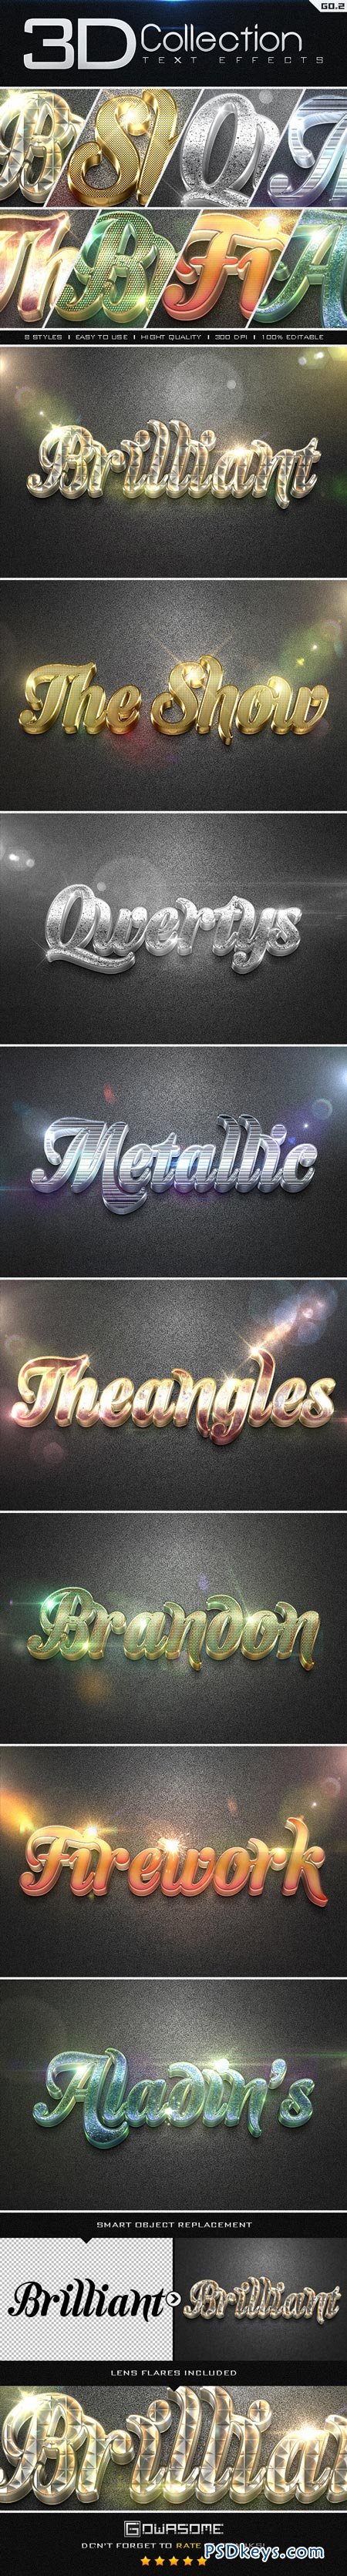 3D Collection Text Effects GO.2 8853630